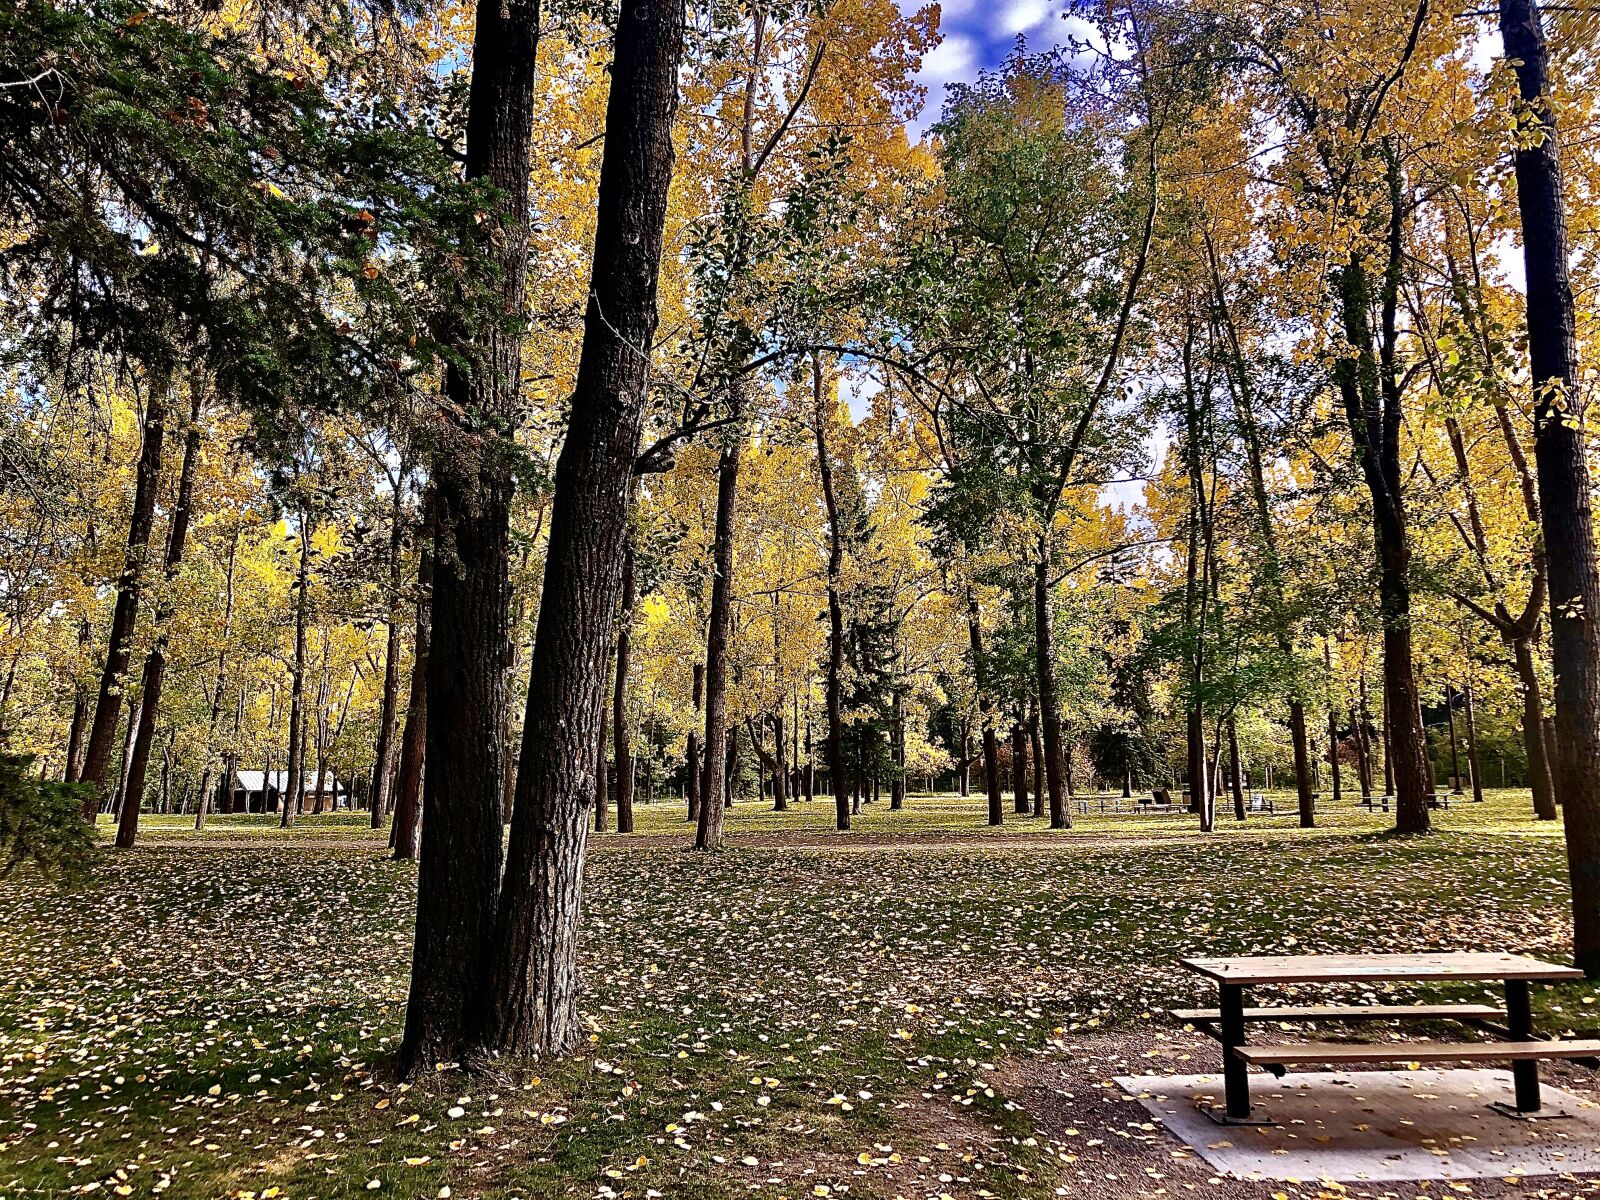 Apple iPhone 8 + iPhone 8 back camera 3.99mm f/1.8 sample photo. Fall, bowness park, calgary photography